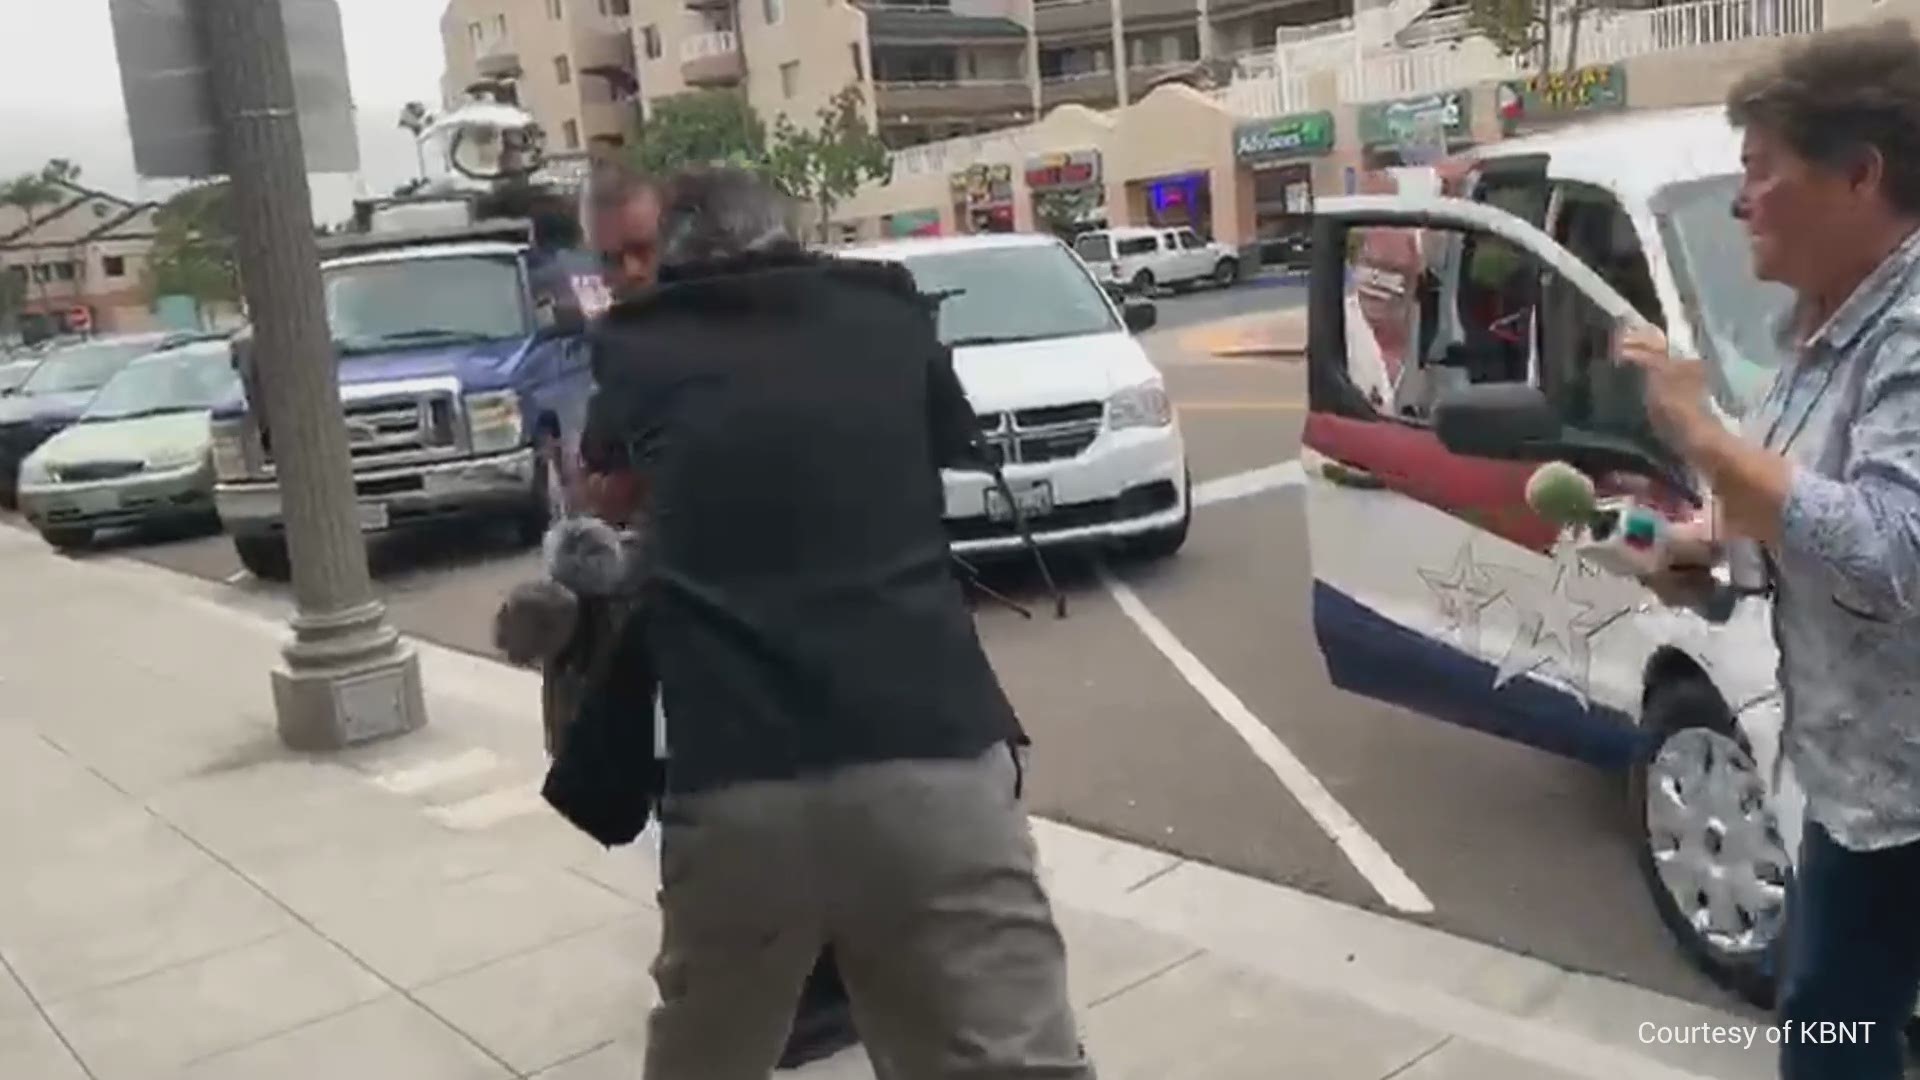 Video from another San Diego news station shows the business owner striking several reporters and camera operators on Monday. La Mesa police responded to the scene.